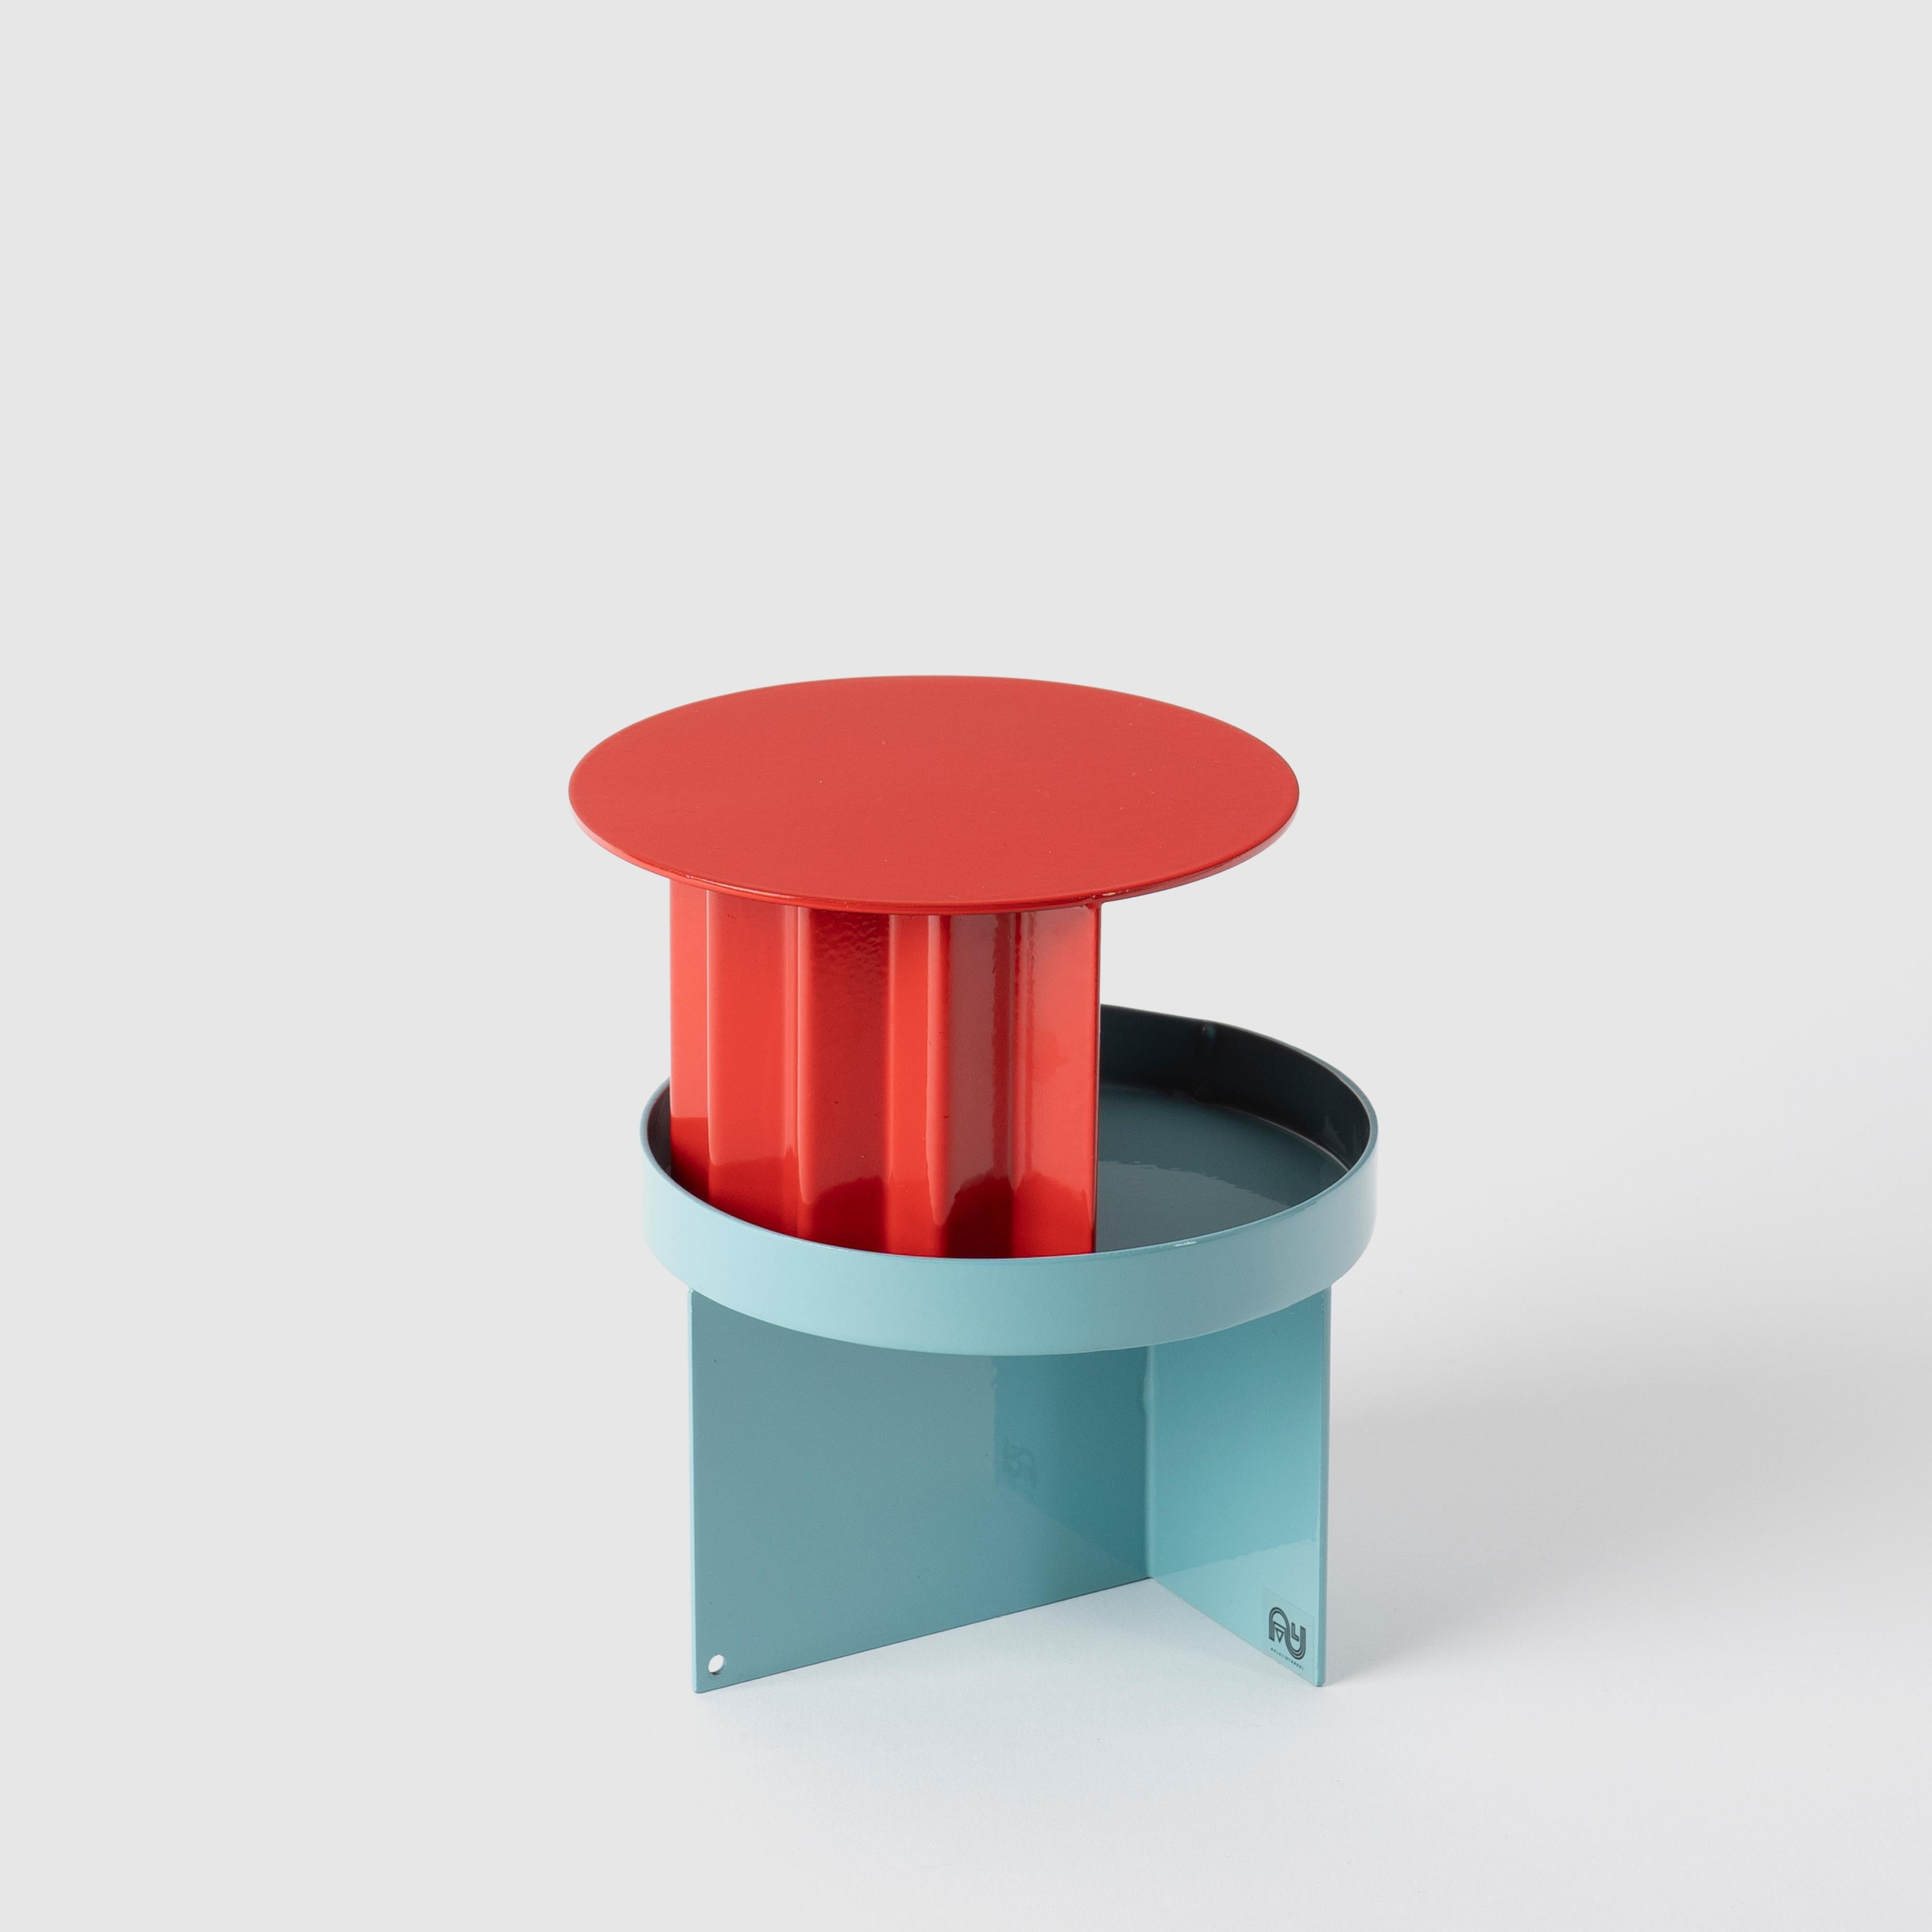 Esnaf collection is inspired by the ever-curios carts and tools of street vendors of Istanbul. The collection takes its cues from the colorful and quirky geometric compositions of the street stalls. Esnaf with its iconic fold metal shapes and pastel